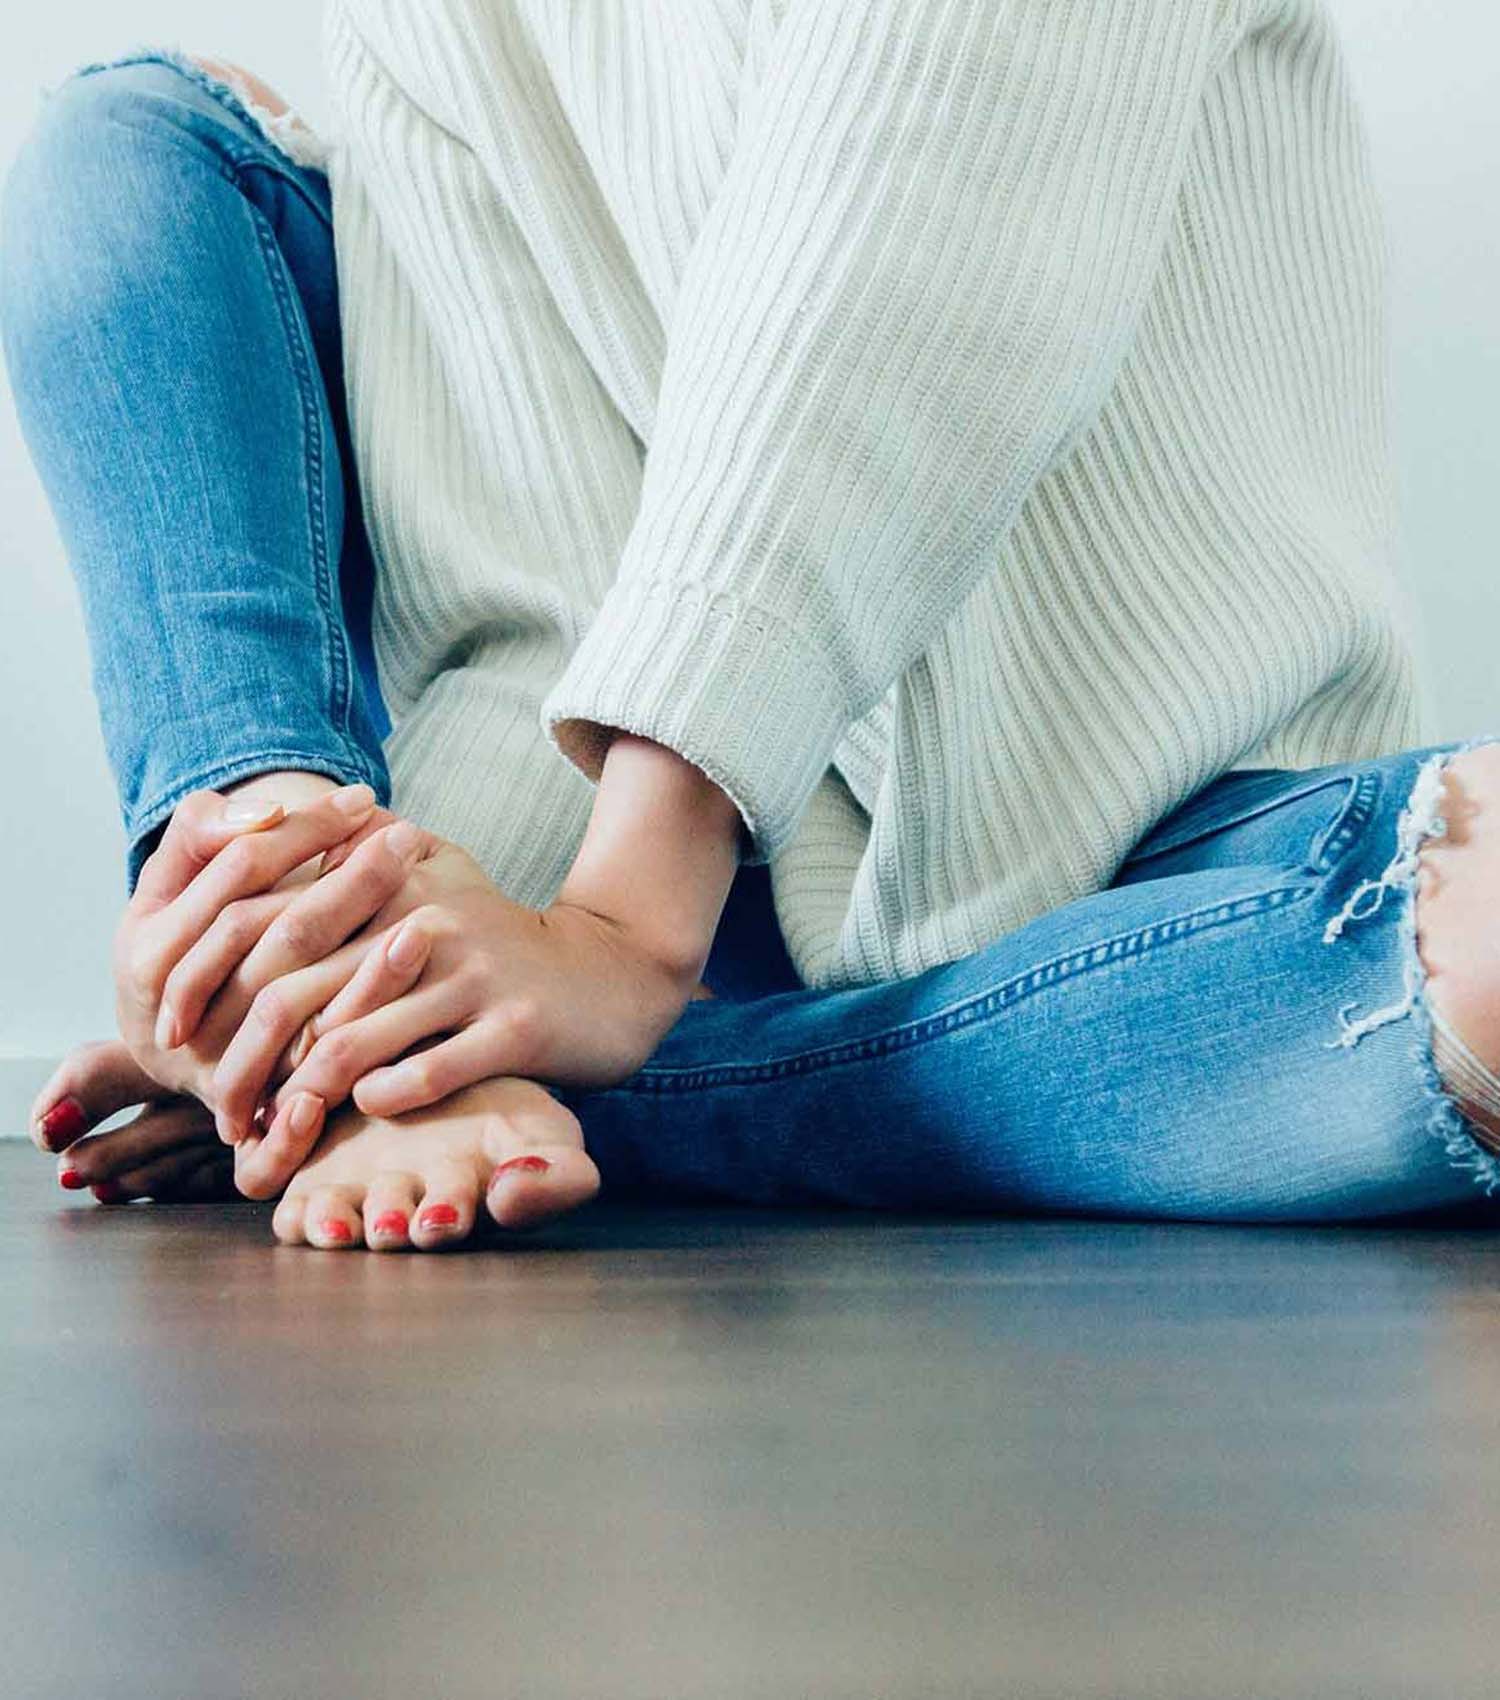 Teenage girl with period cramps clasping hands sitting on floor